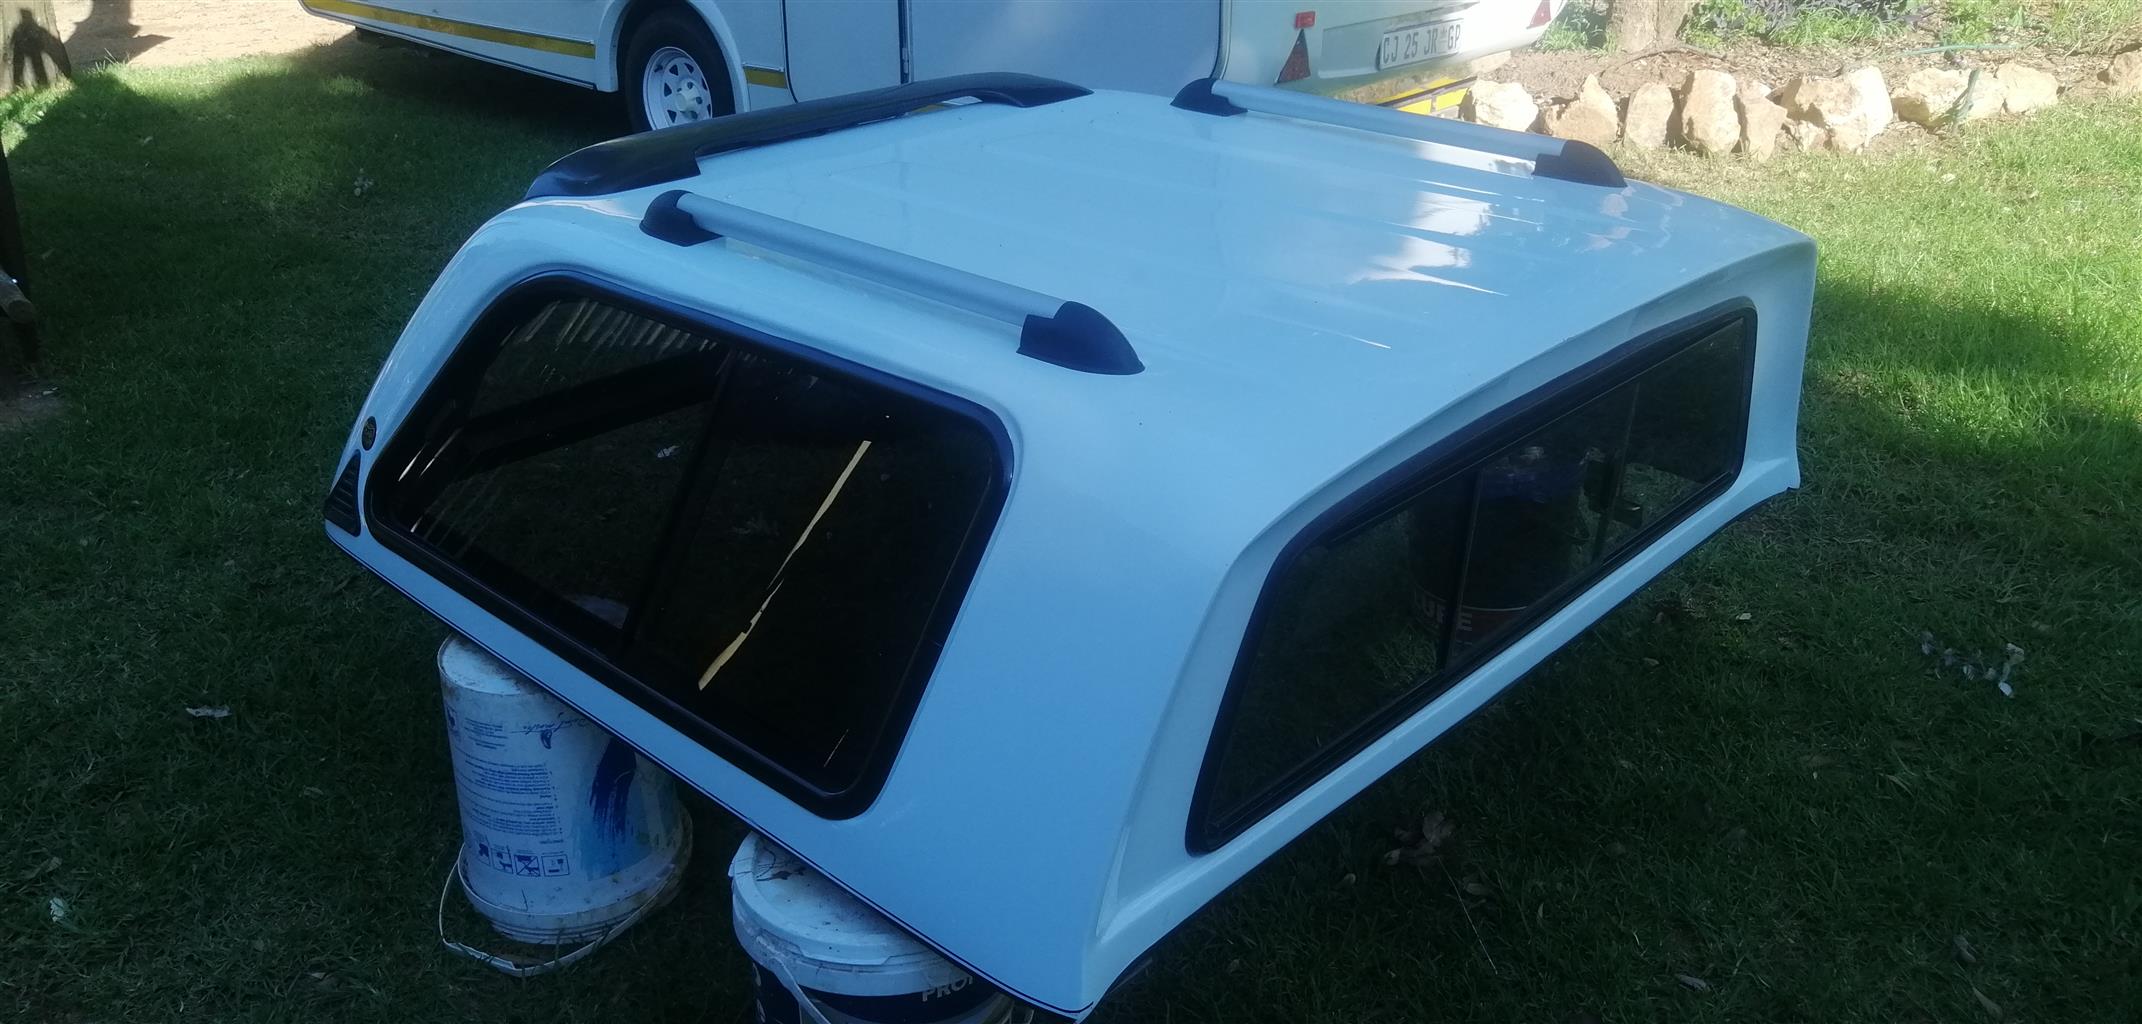 Bakkie Canopy, 2021 Andy cab Ford ranger 2.2 tdci double cab in mint condition 